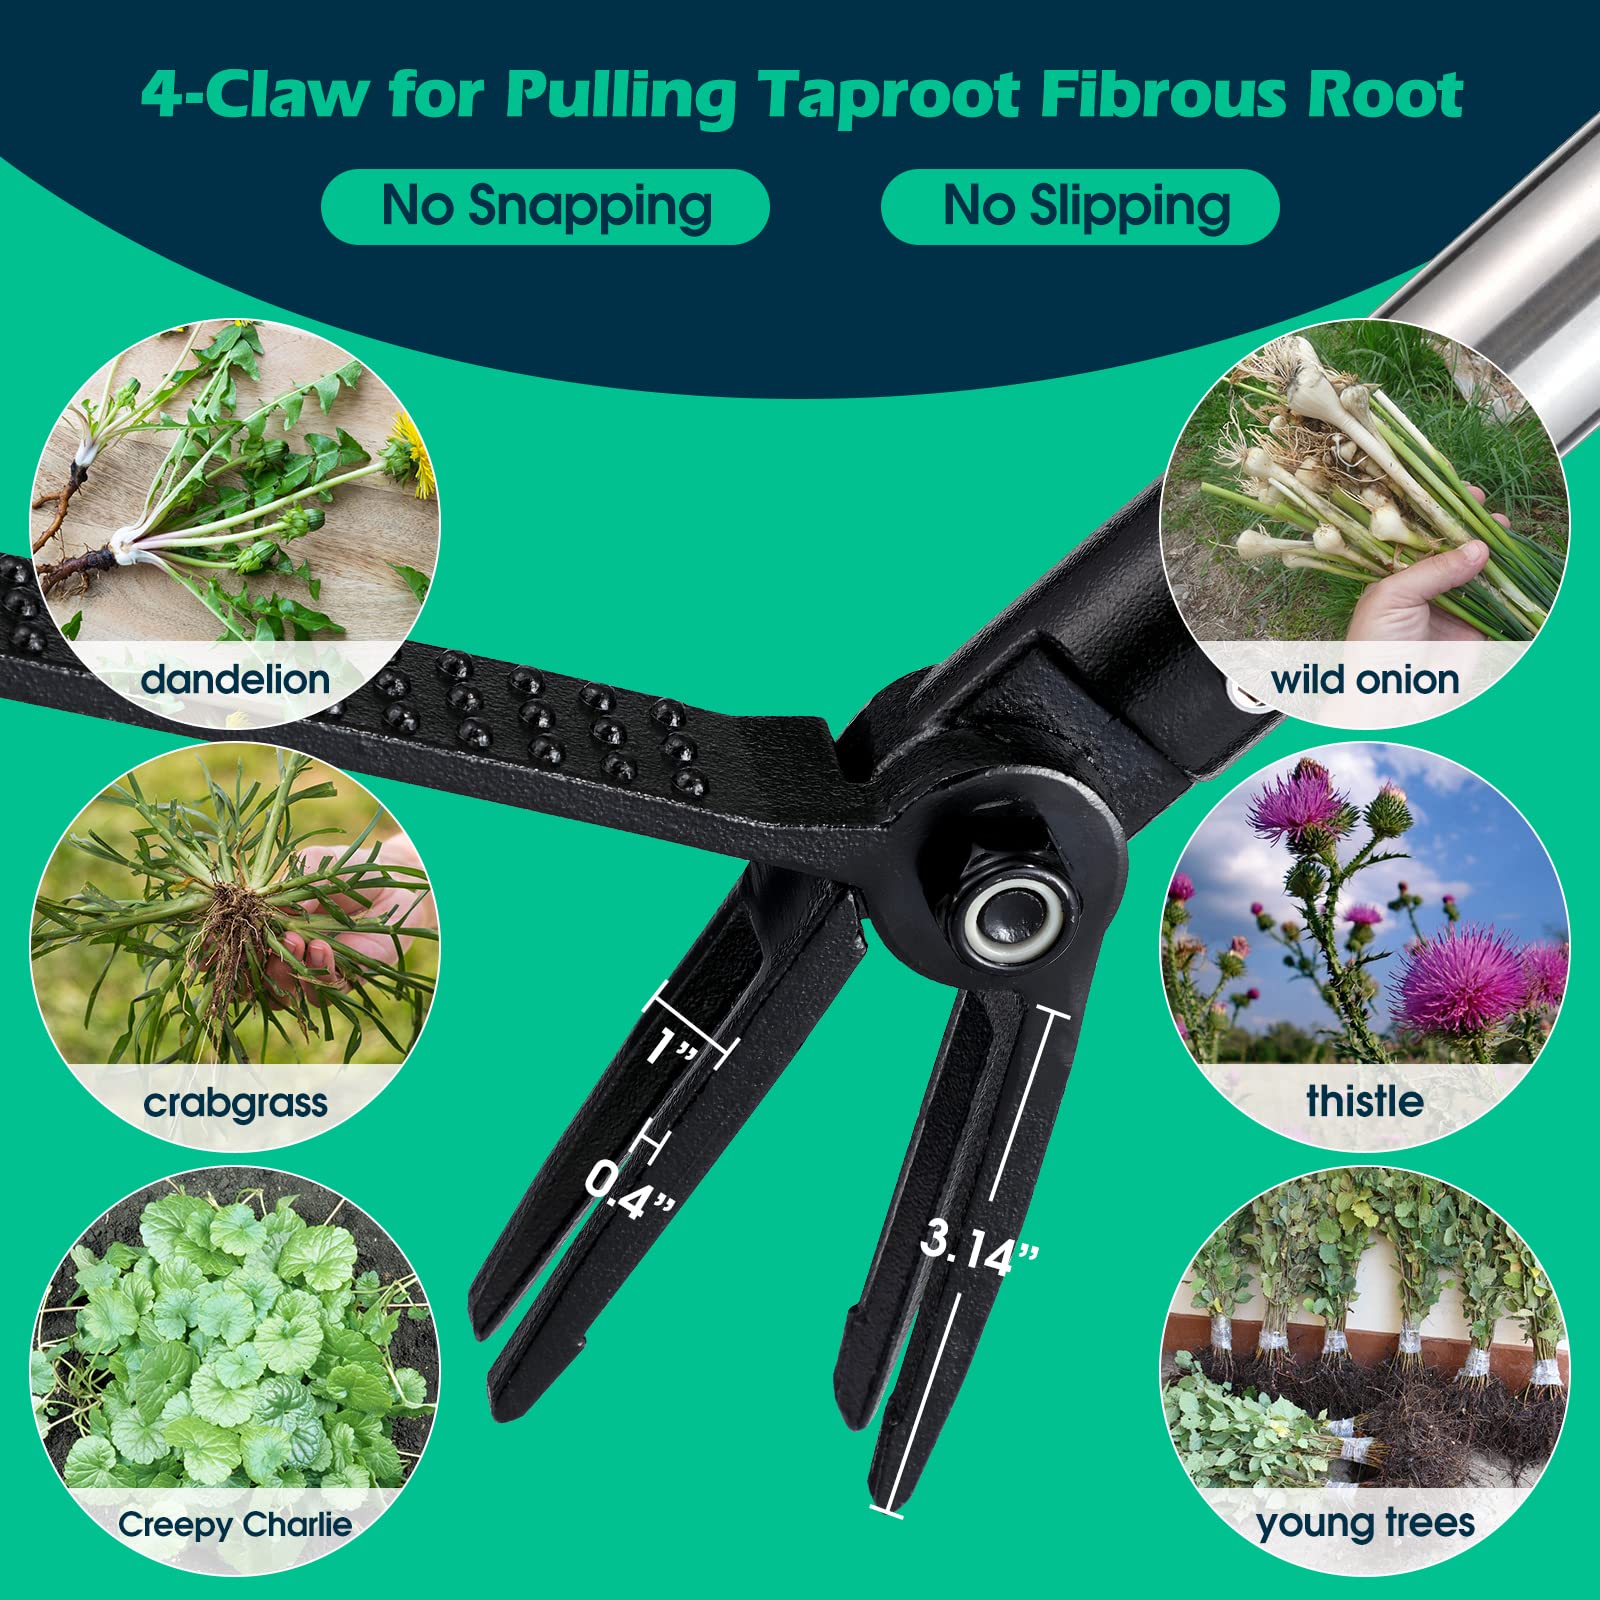 Lilyvane Weed Puller Tool,71inch Adjustable Stand Up Weed Puller Long Handle,Stand Dandelion Digger Puller, Ergonomic Standing Weeding Puller Tool Weed Picker for Garden Lawn Farmland Yard